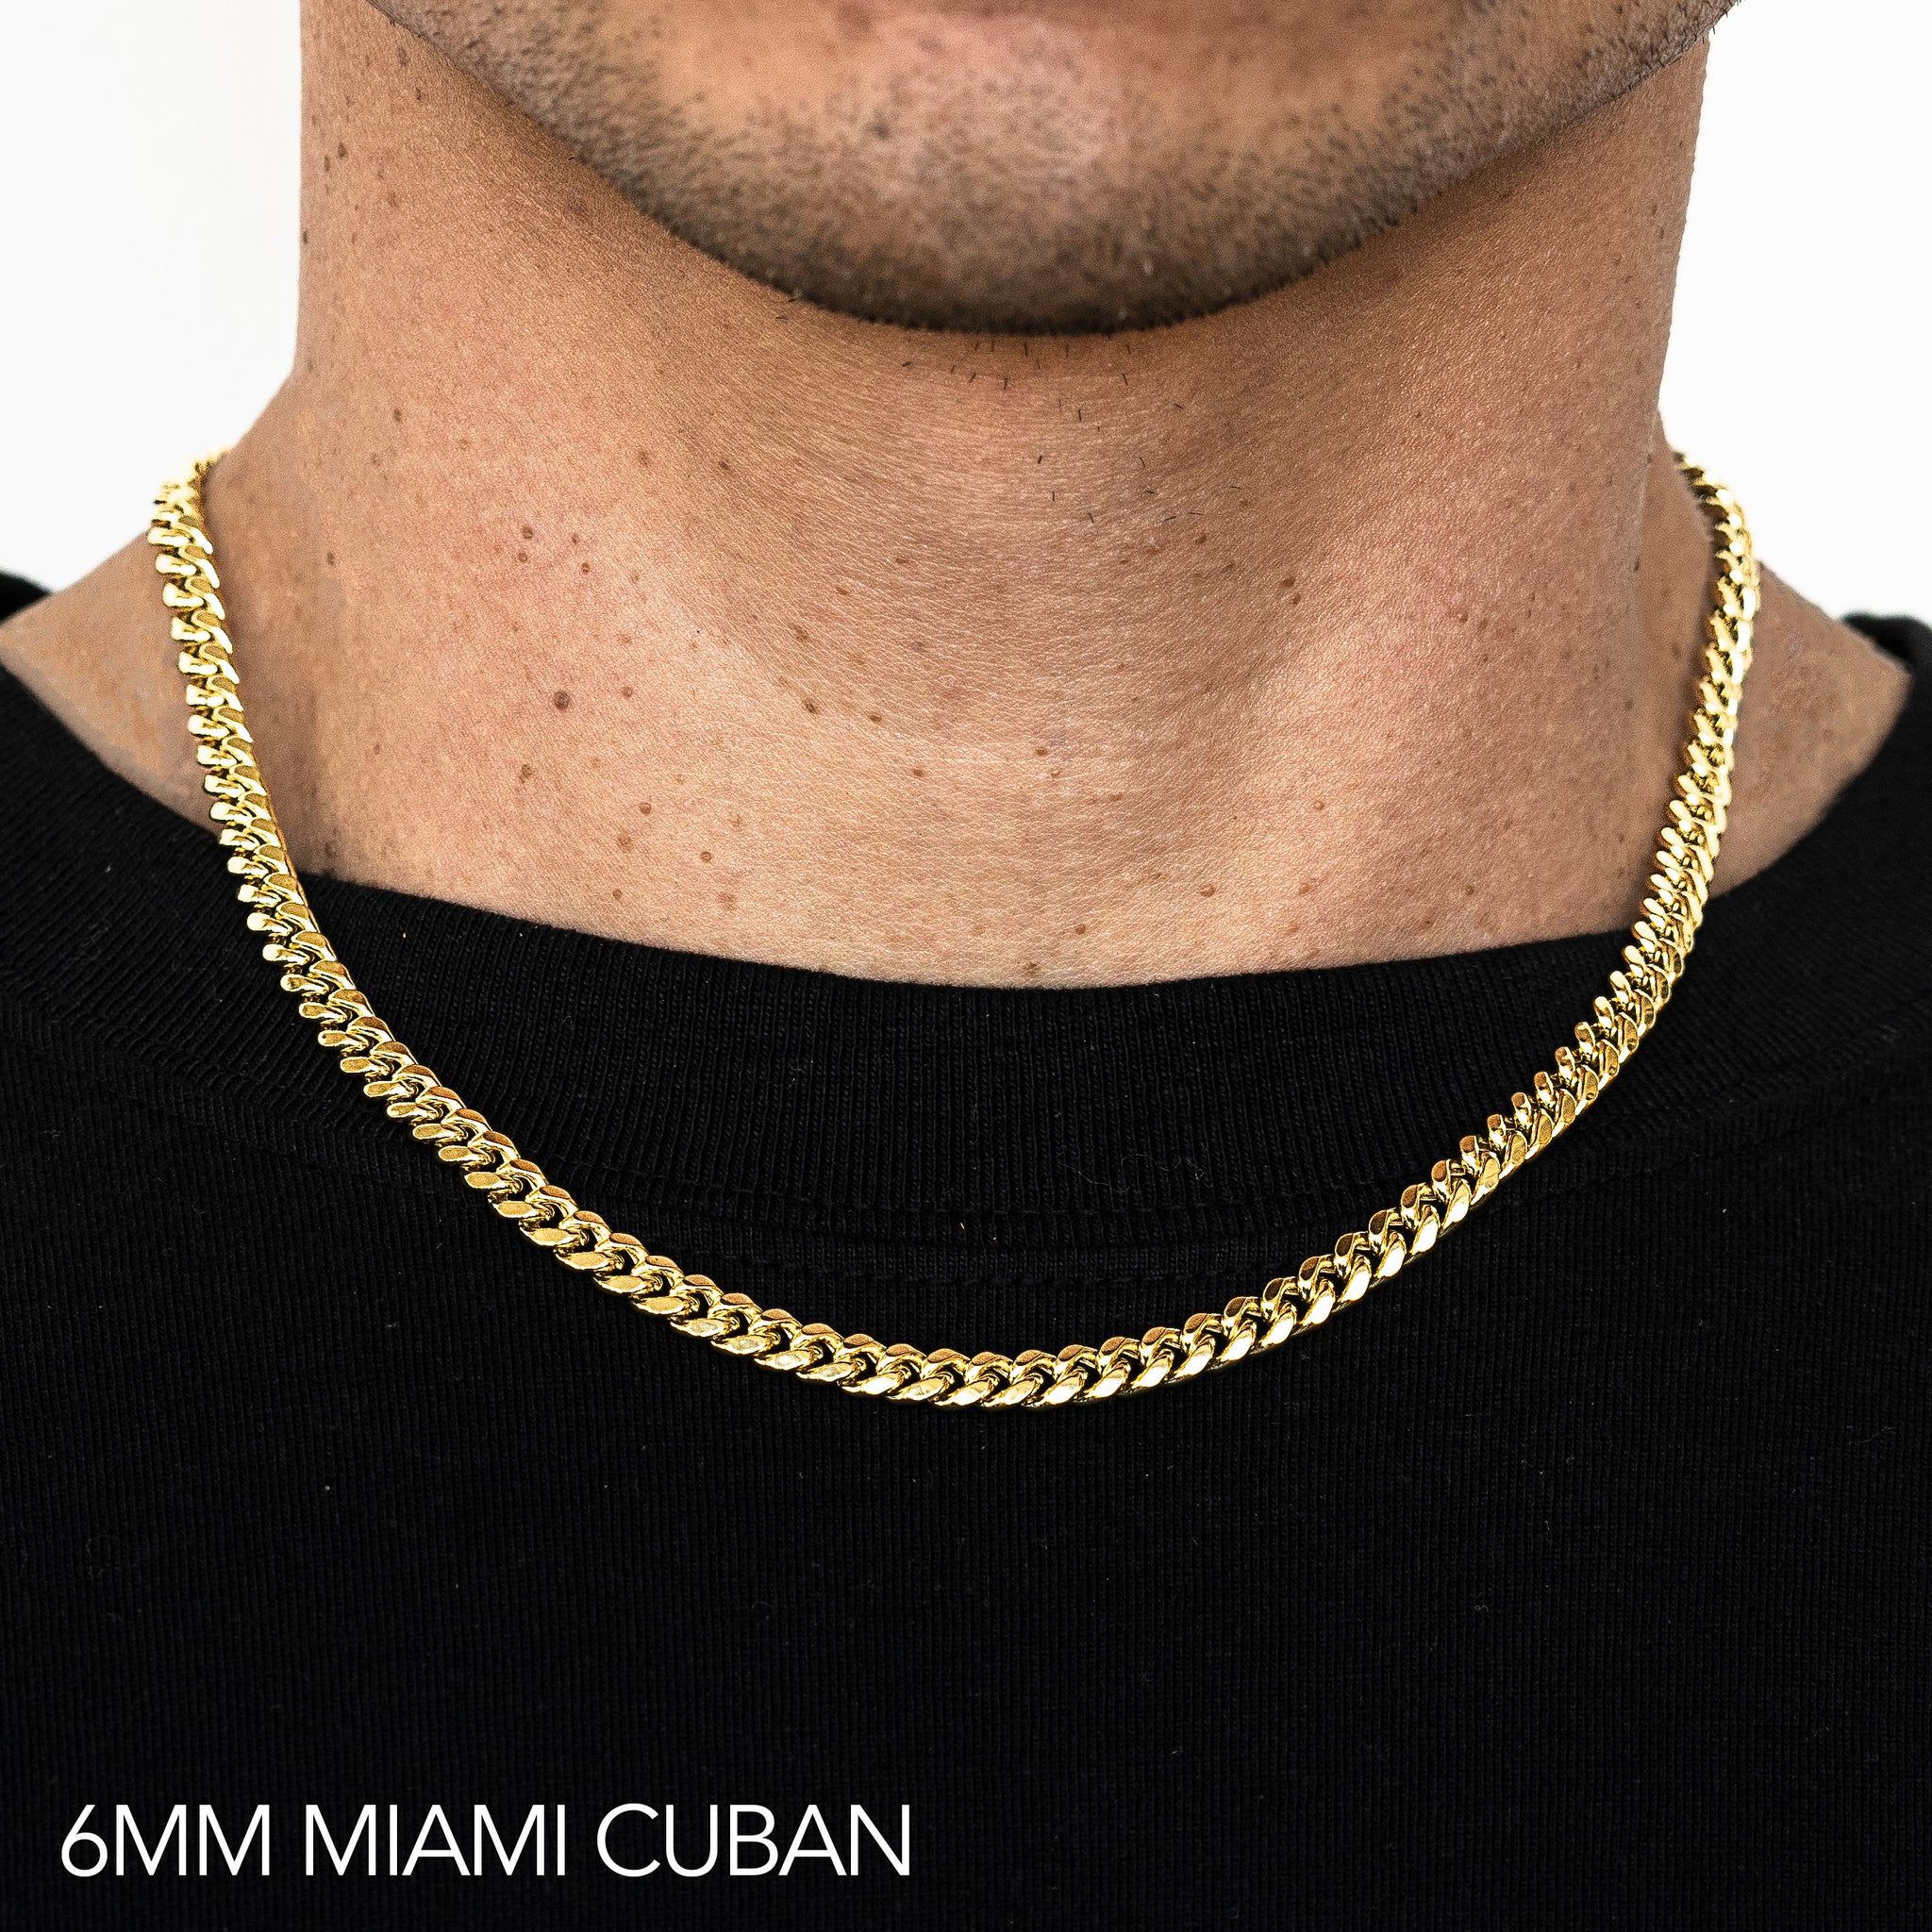 18K 6MM YELLOW GOLD SOLID MIAMI CUBAN 16" CHAIN NECKLACE (AVAILABLE IN LENGTHS 7" - 30")